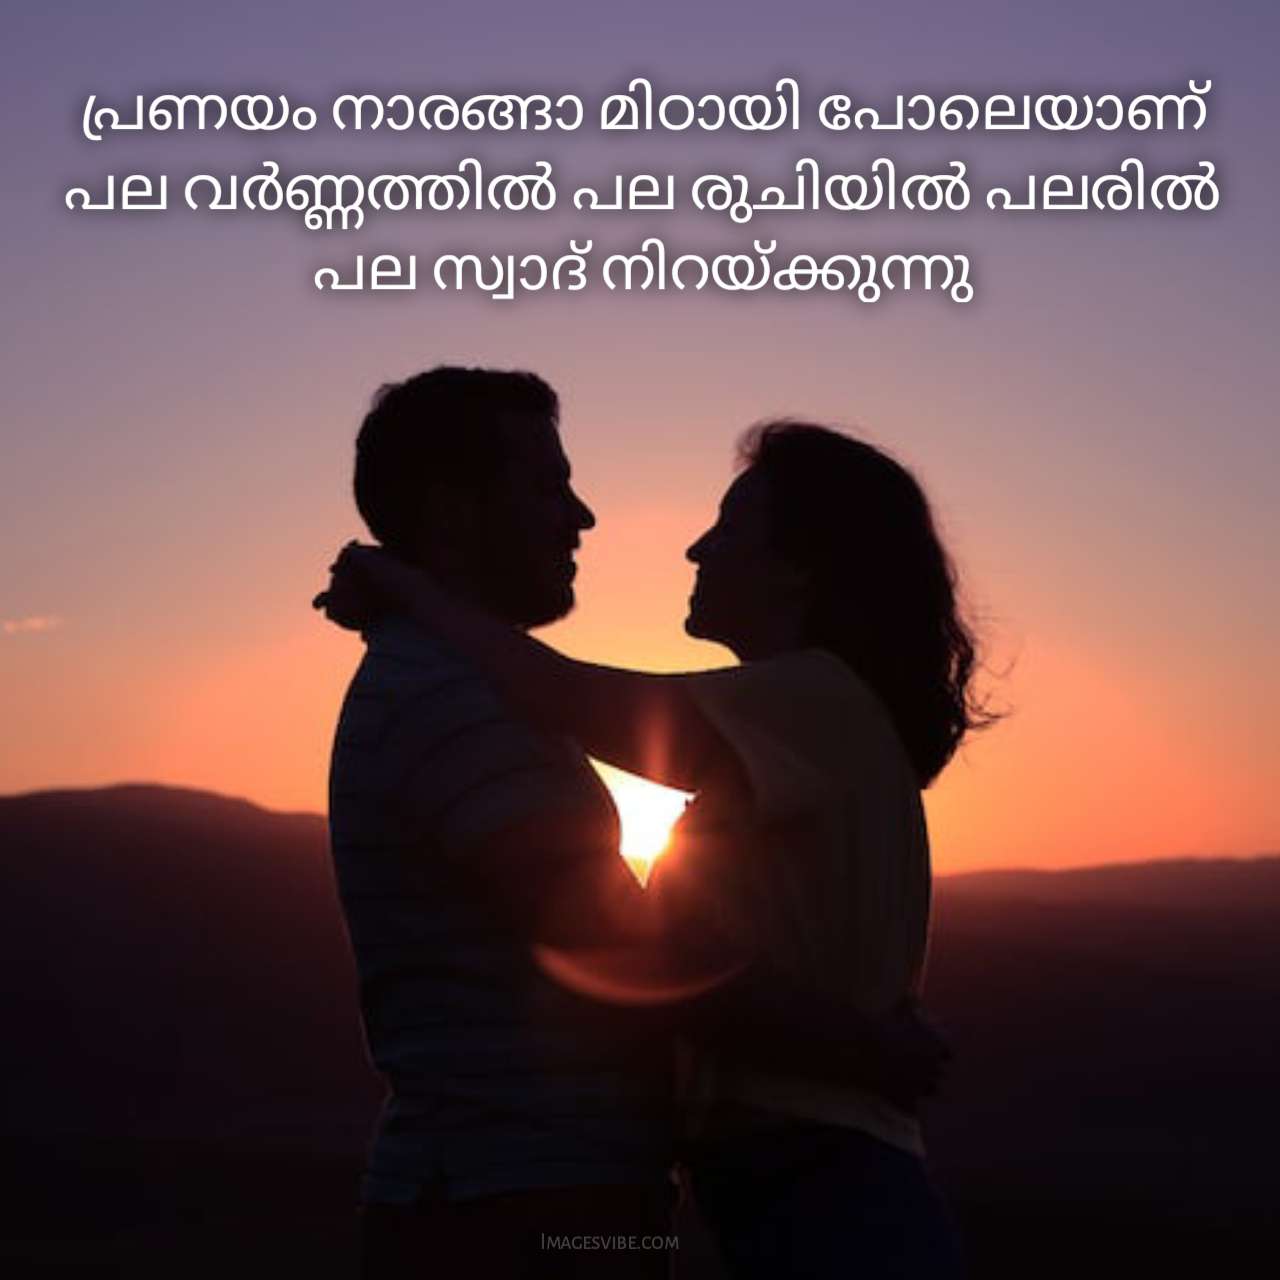 Love Quotes In Malayalam3 